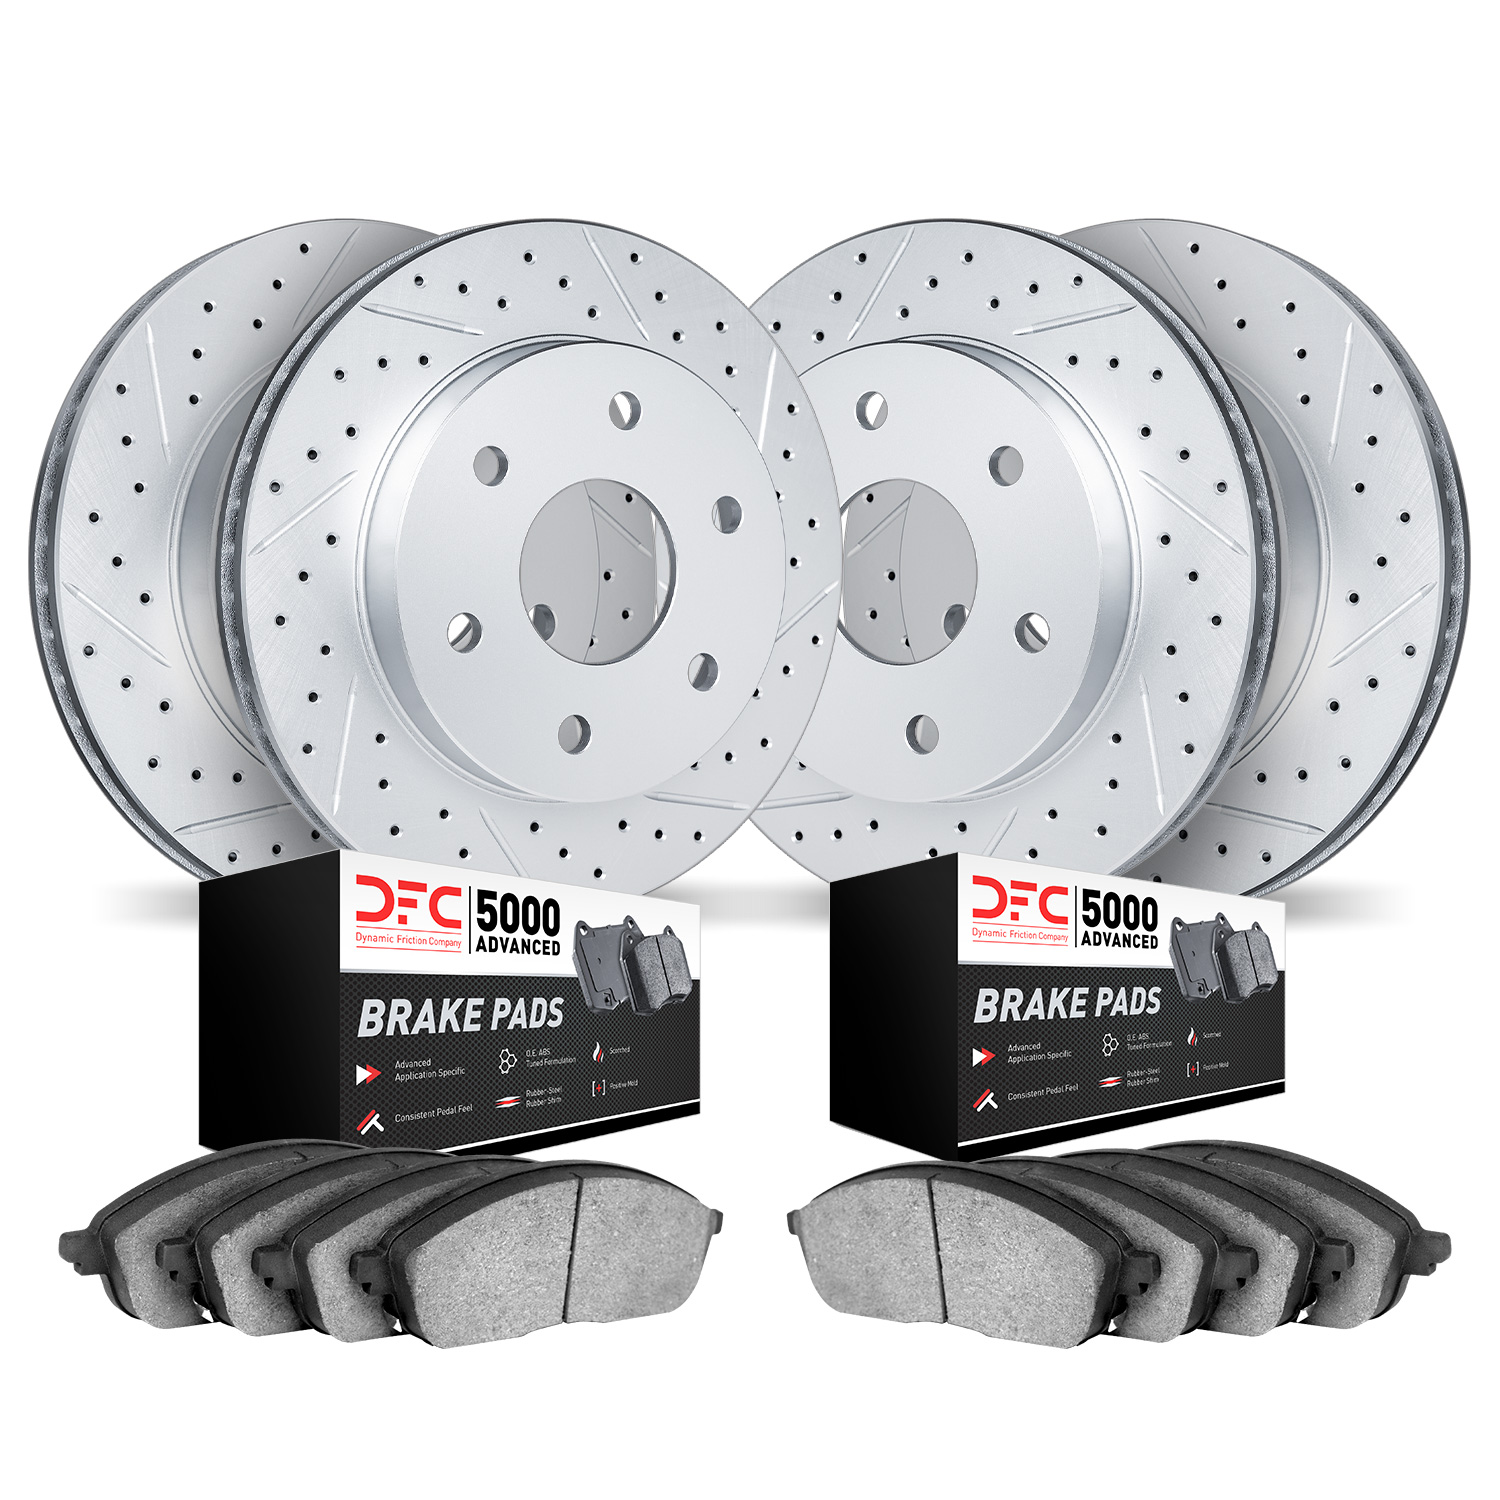 2504-48036 Geoperformance Drilled/Slotted Rotors w/5000 Advanced Brake Pads Kit, 2007-2014 GM, Position: Front and Rear